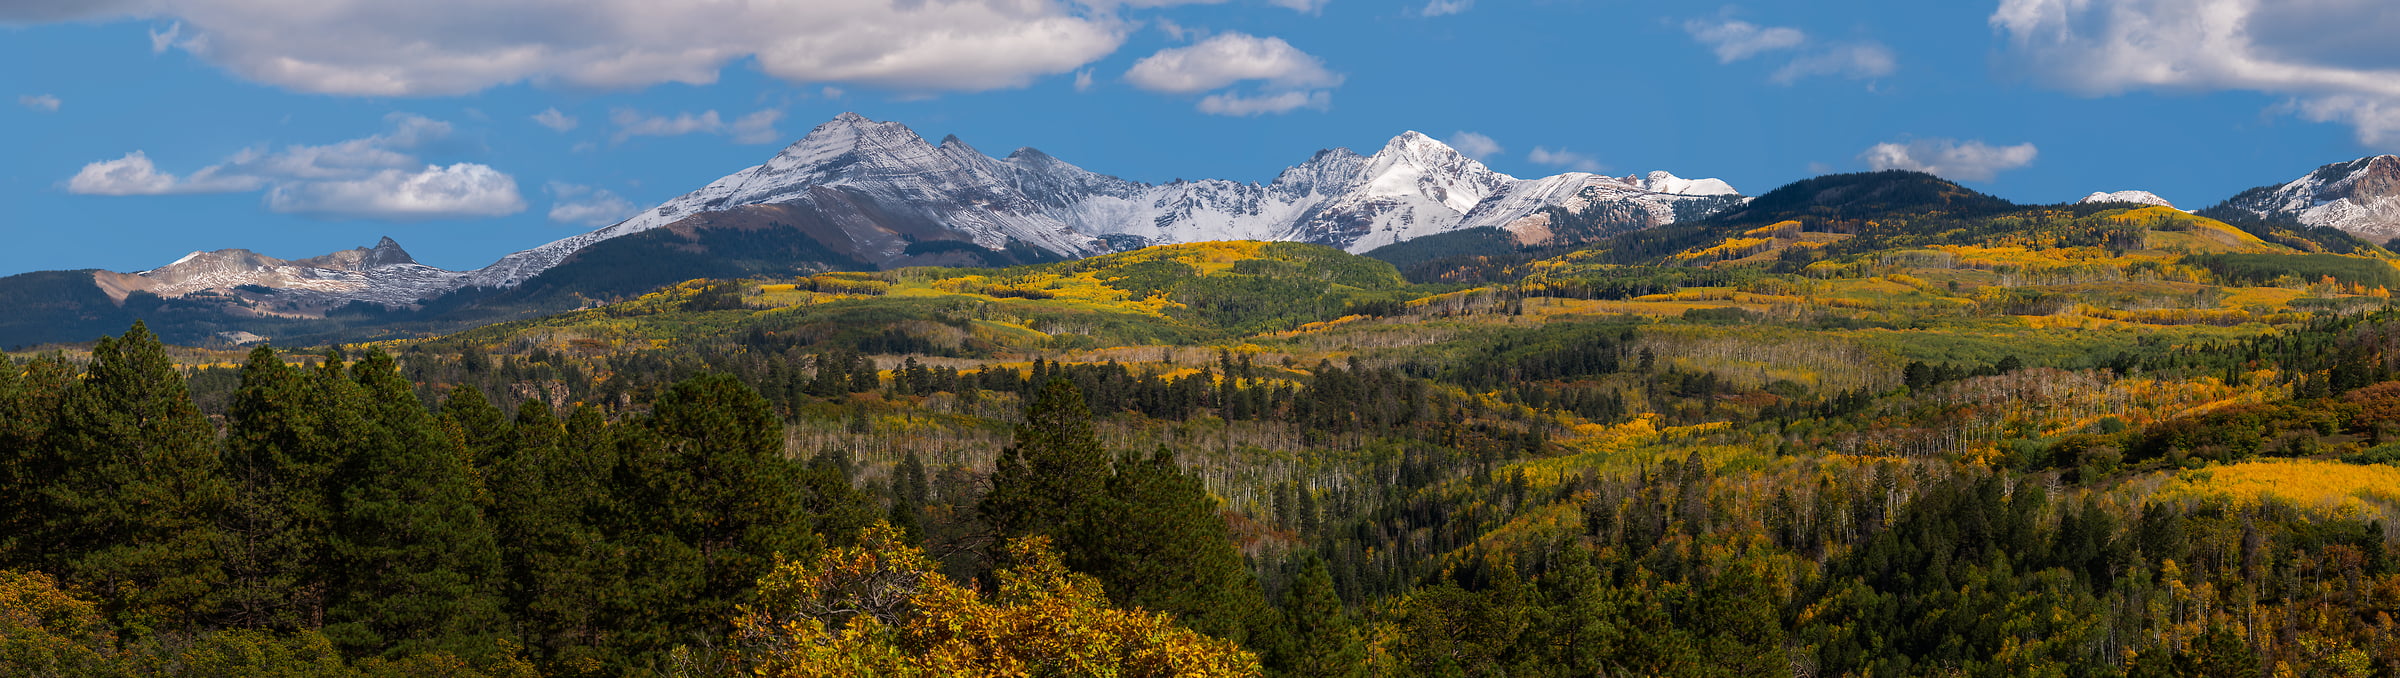 409 megapixels! A very high resolution, large-format VAST photo print of Colorado landscape in autumn with Mt. Hesperus in the background; photograph created by Phillip Noll